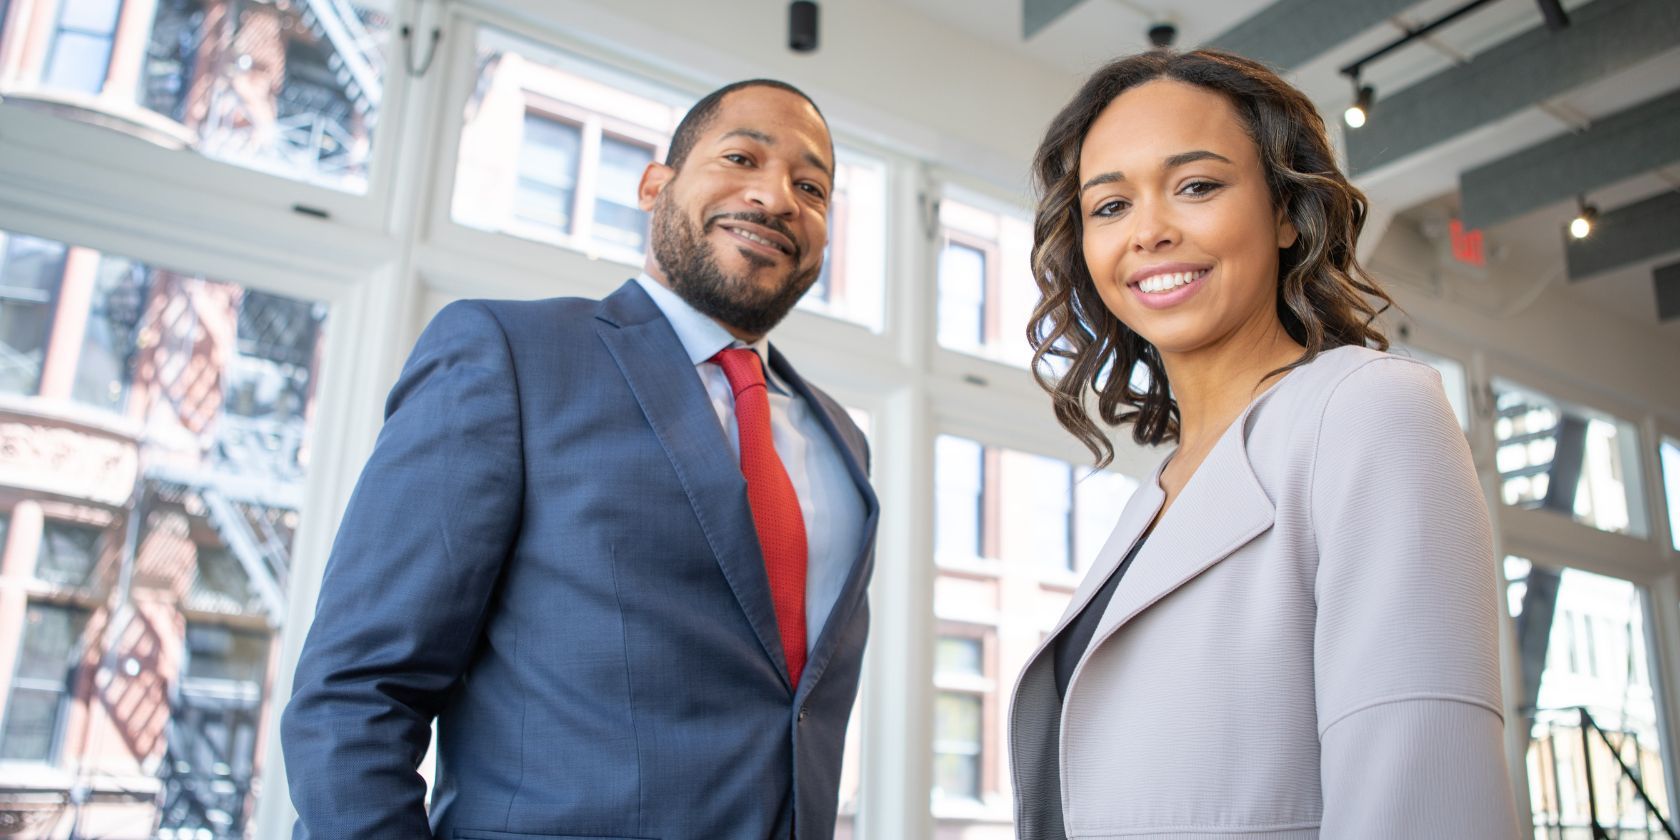 man and woman in corporate attire smiling 